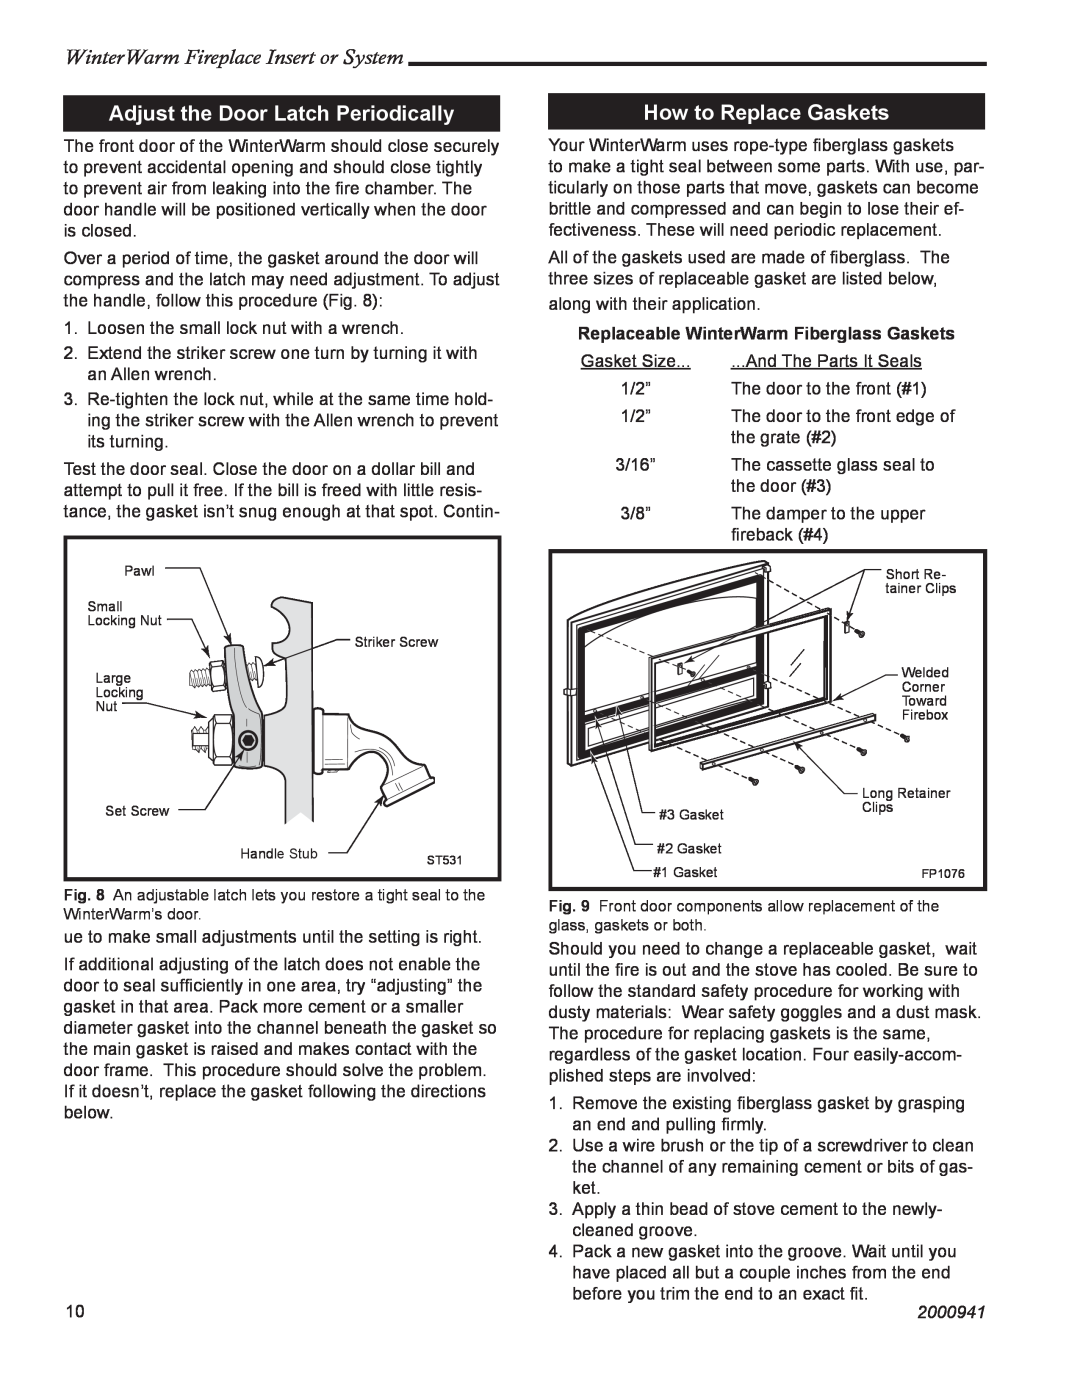 Vermont Casting WinterWarm Fireplace Insert or System Adjust the Door Latch Periodically, How to Replace Gaskets, 2000941 